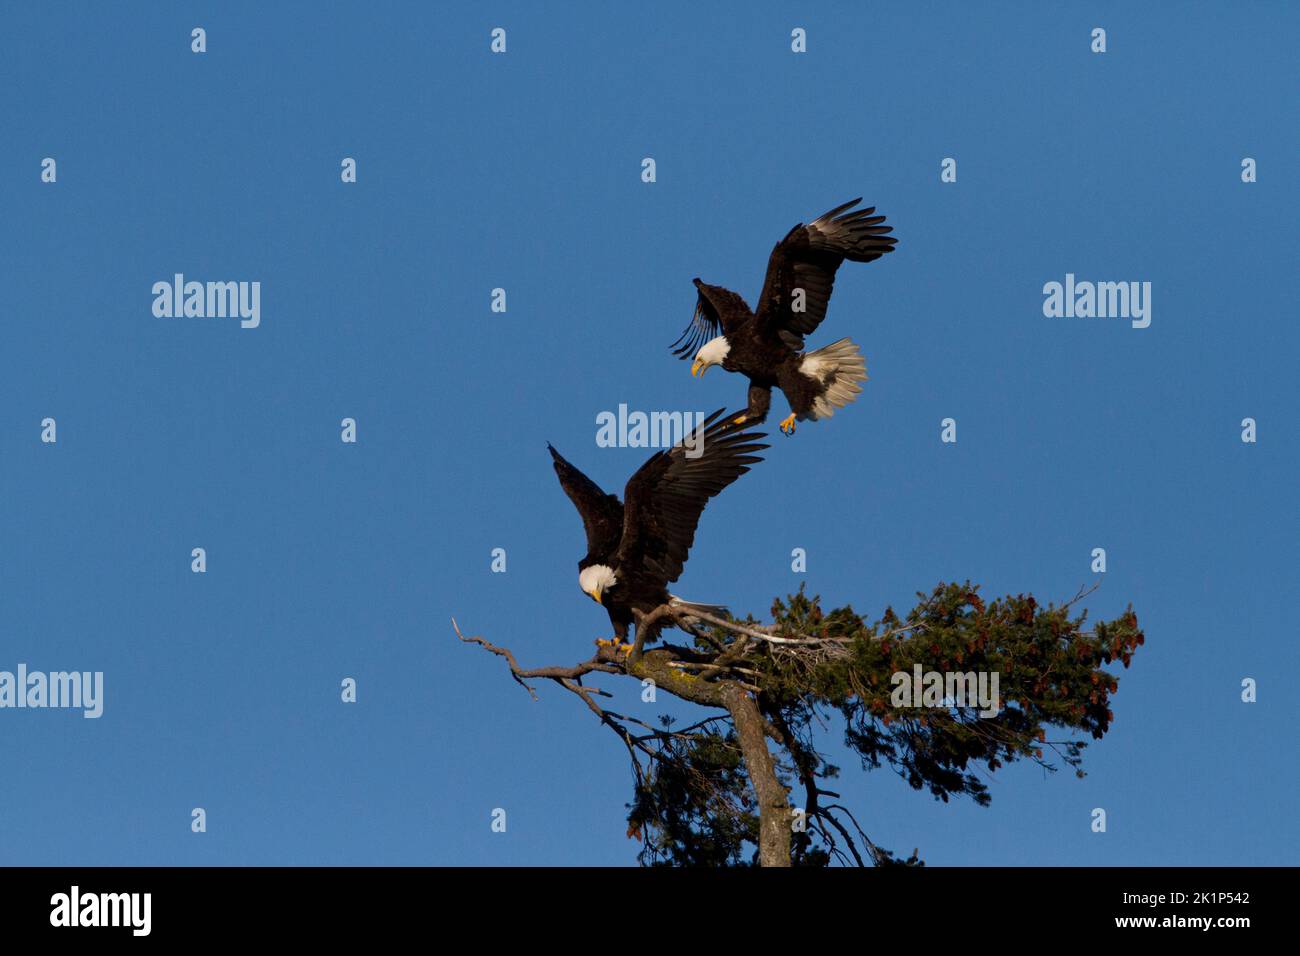 Two Bald Eagles (Haliaeetus leucocephalus) about to land on the top of a douglas fir tree along the coast at Nanaimo, Vancouver Island, BC, Canada Stock Photo